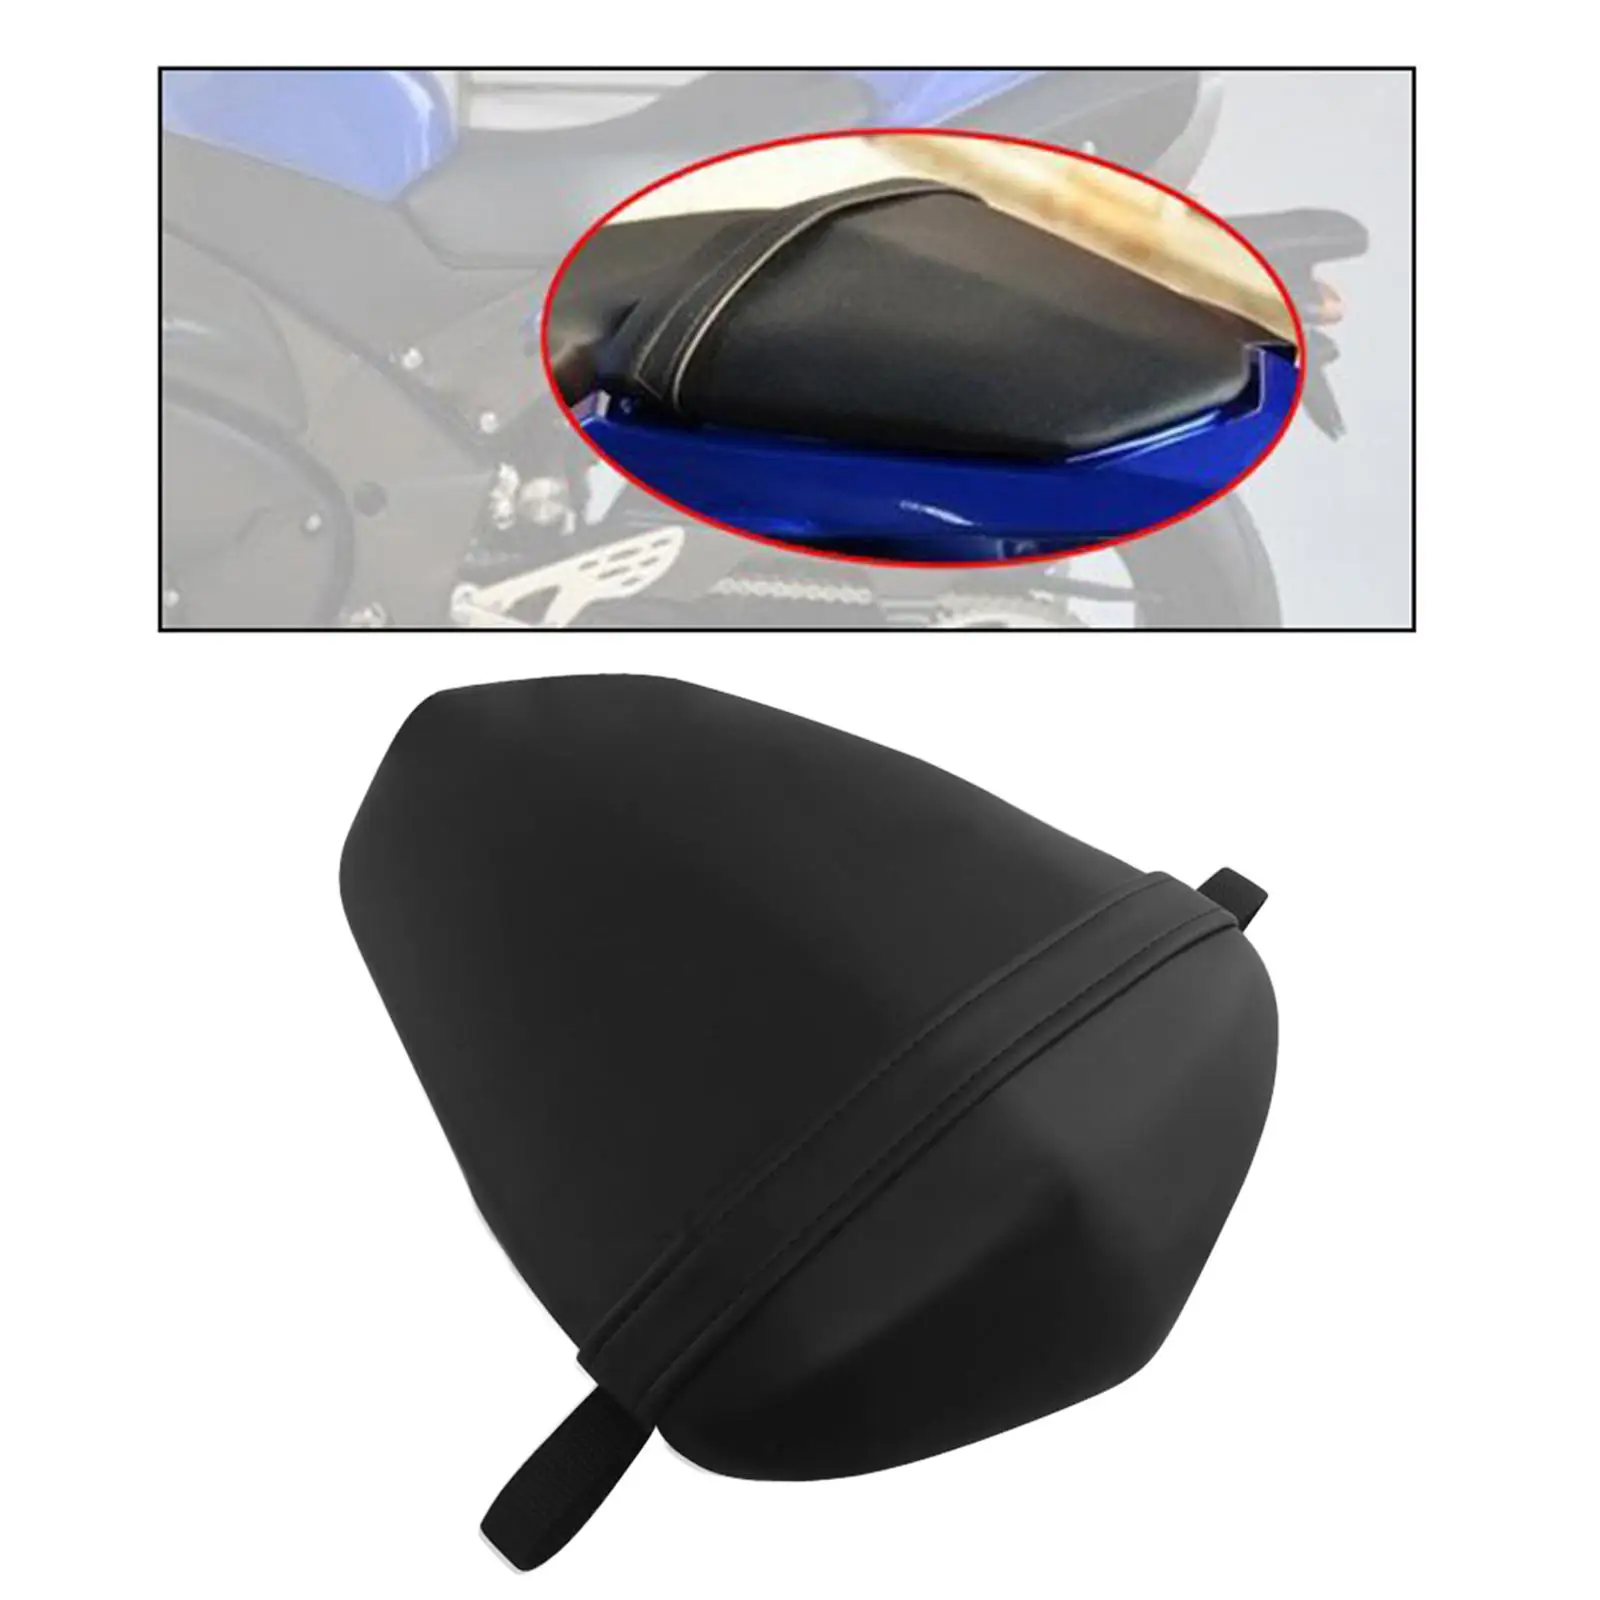 Motorcycle Rear Passenger Cushion Tail Pillion Pad Comfortable Durable Motorcycle Pillion Passenger Rear Seat for YZF1000 R1